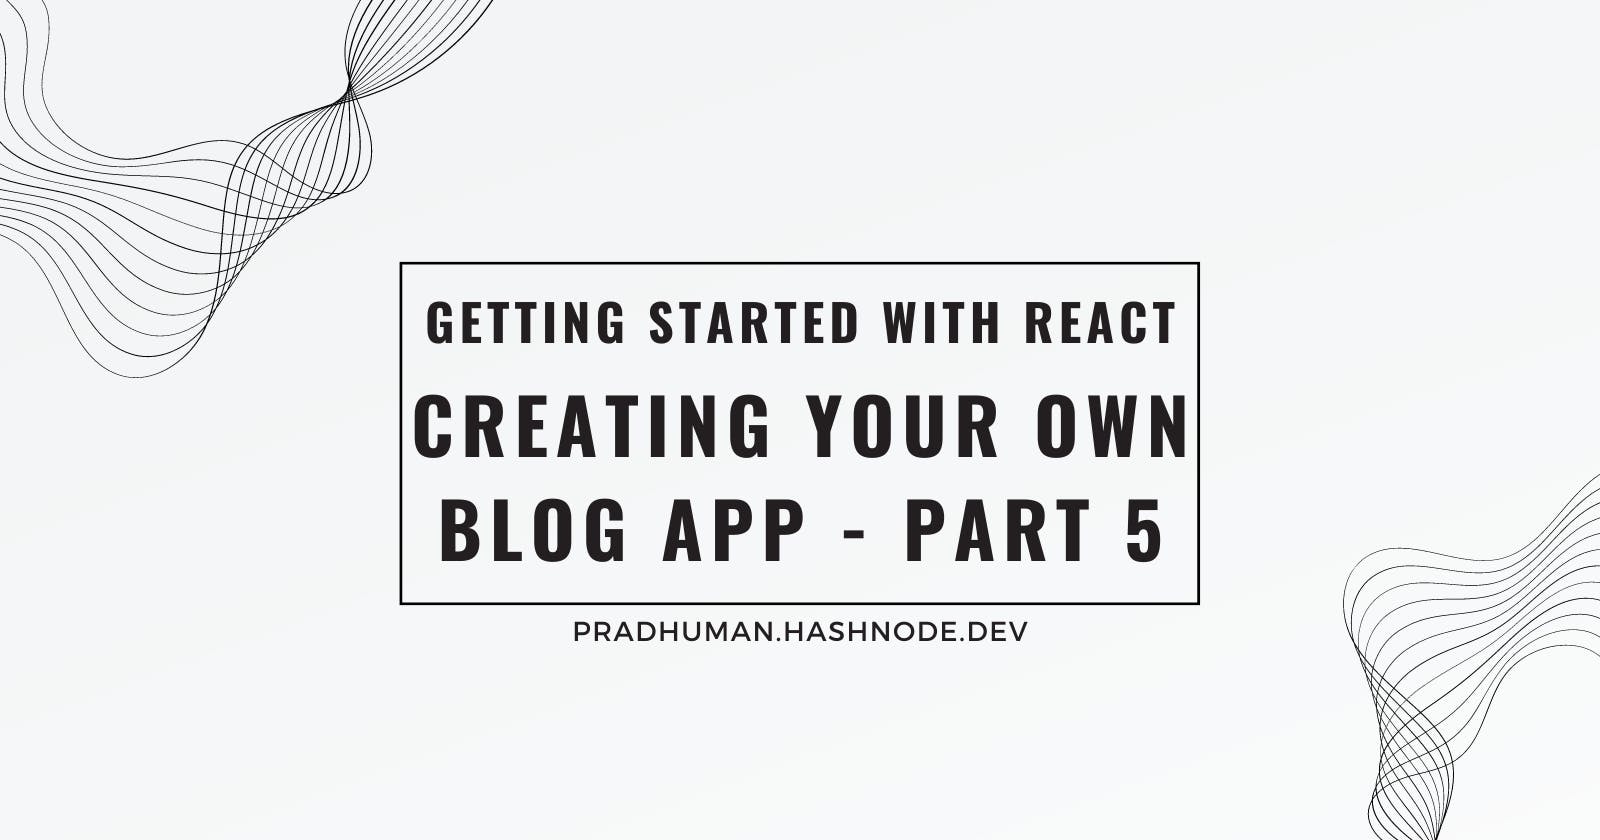 Getting Started with React: Creating Your Own Blog App - Part 5